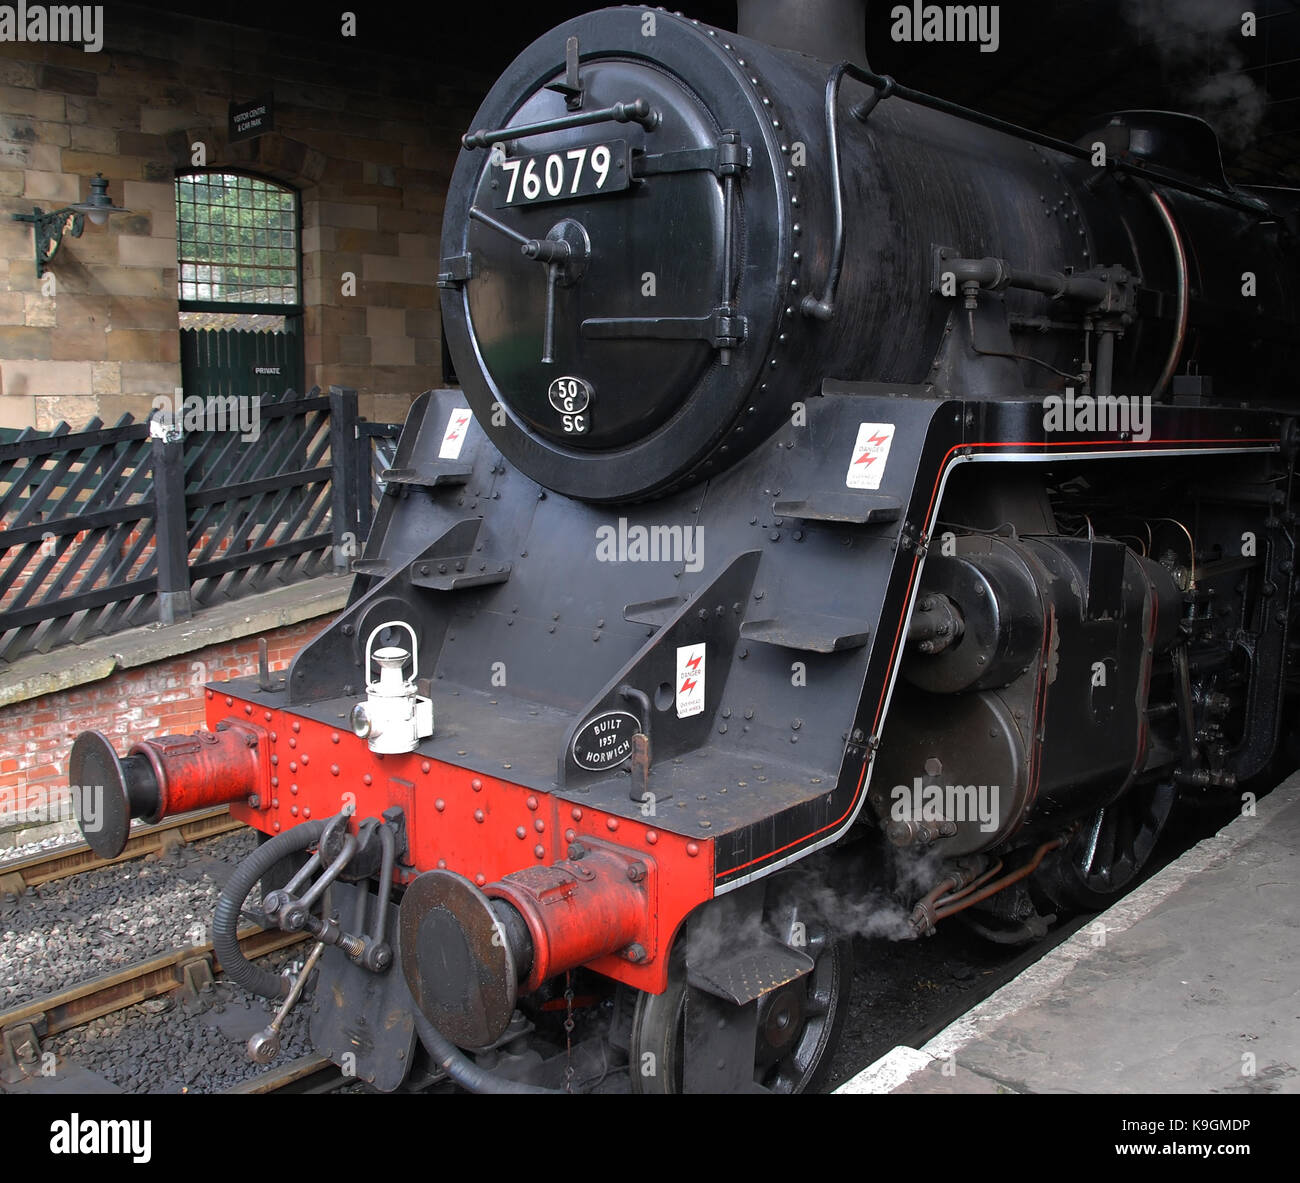 A close up view of the front of an old British steam locomotive stationary at a platform Stock Photo